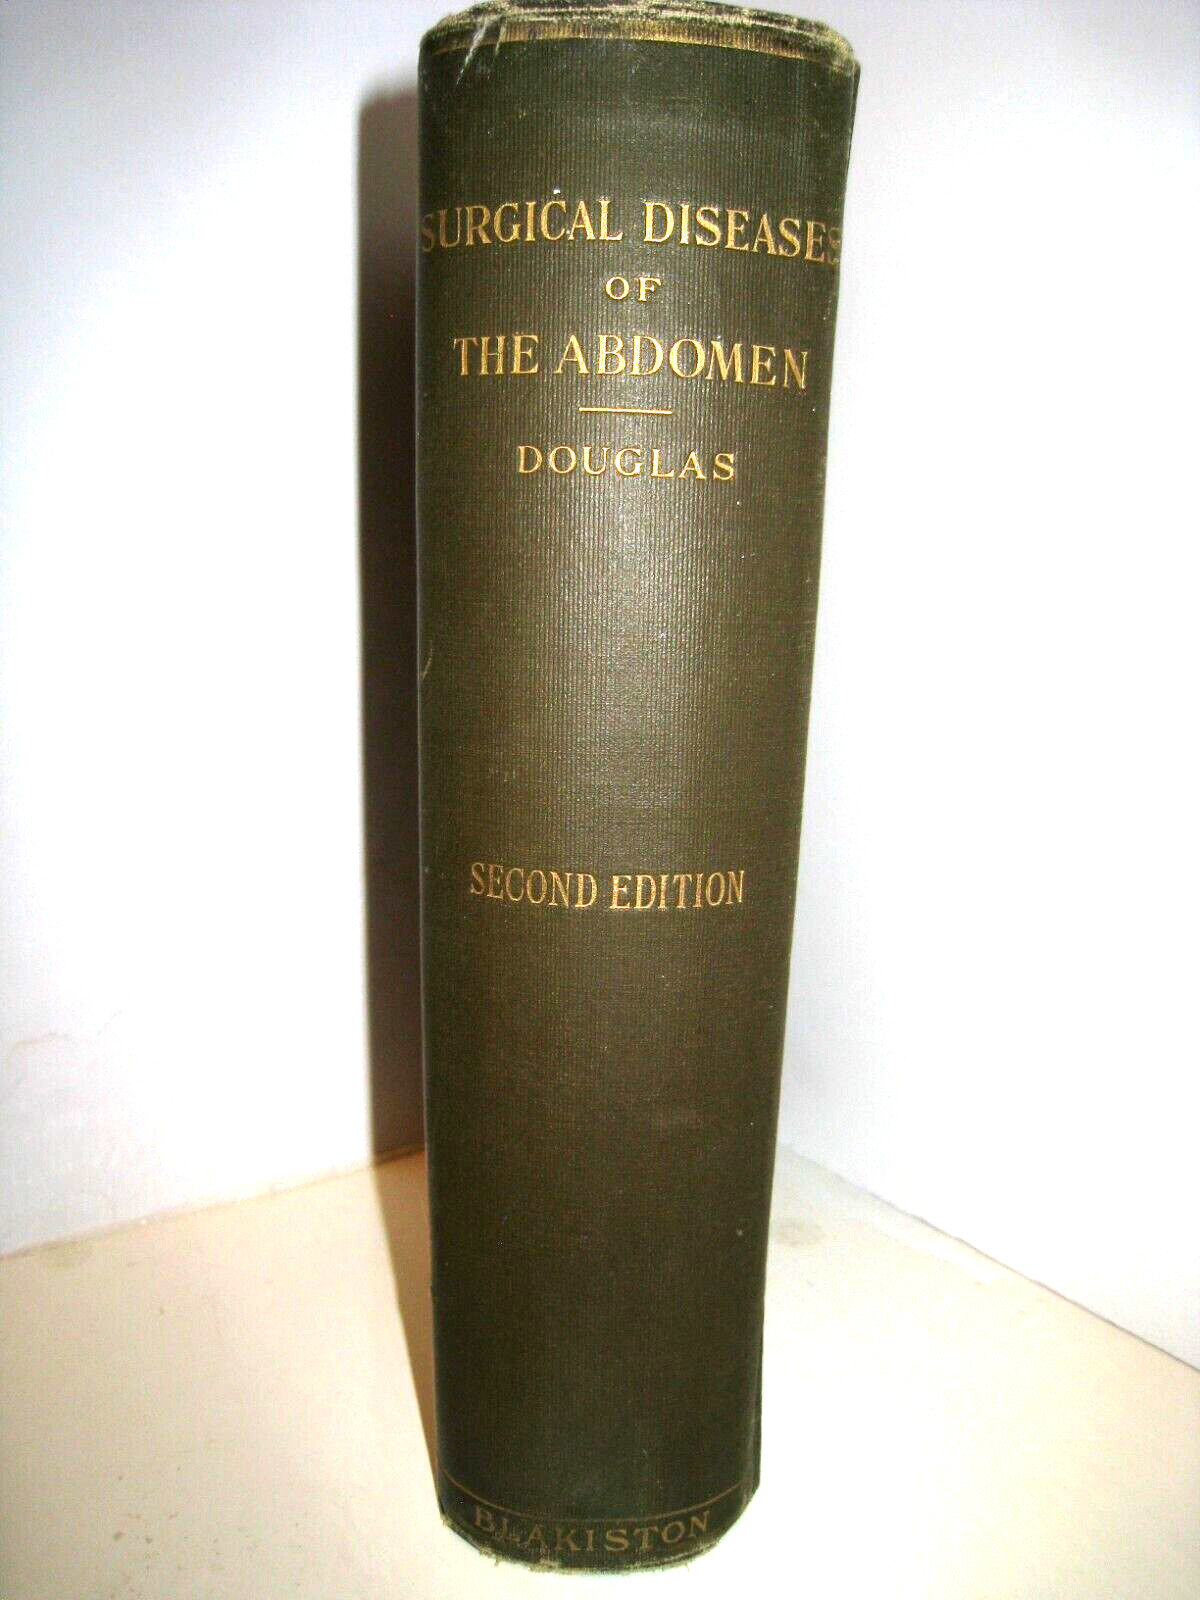 1909 Surgical Diseases of the Abdomen by Douglas 2 nd Edition Hardcover